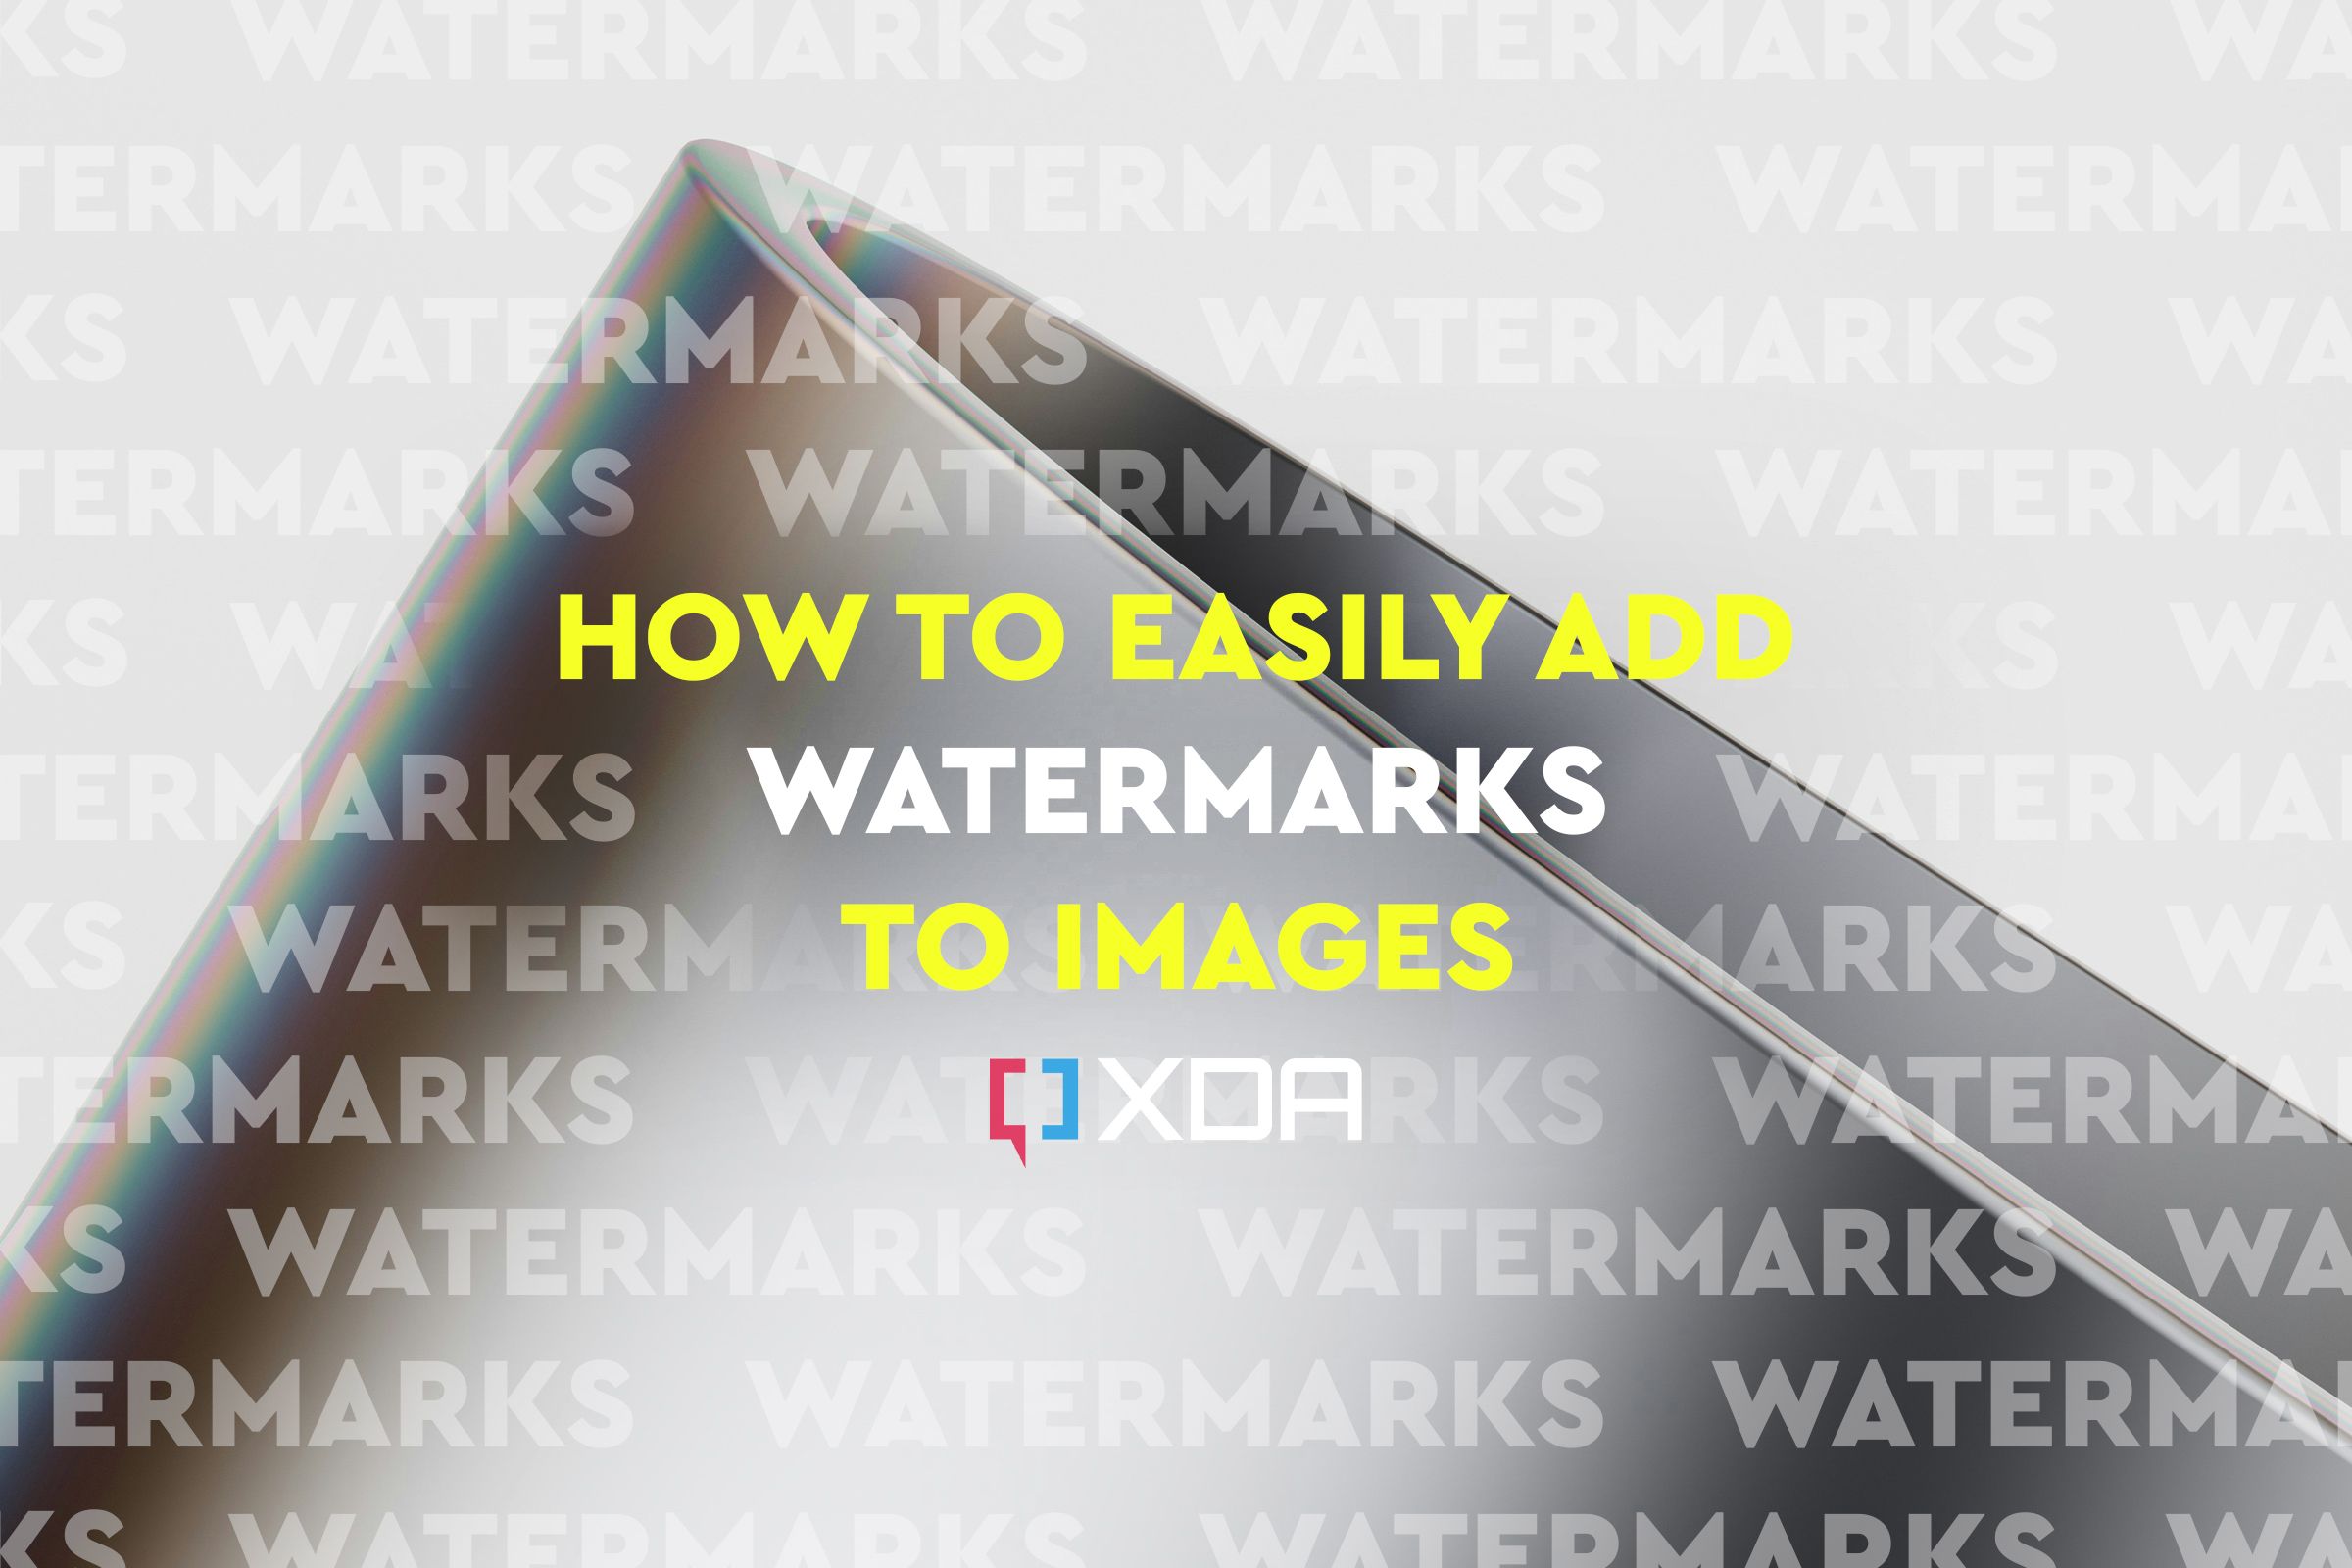 2 free and easy ways to add watermarks to your images on a PC